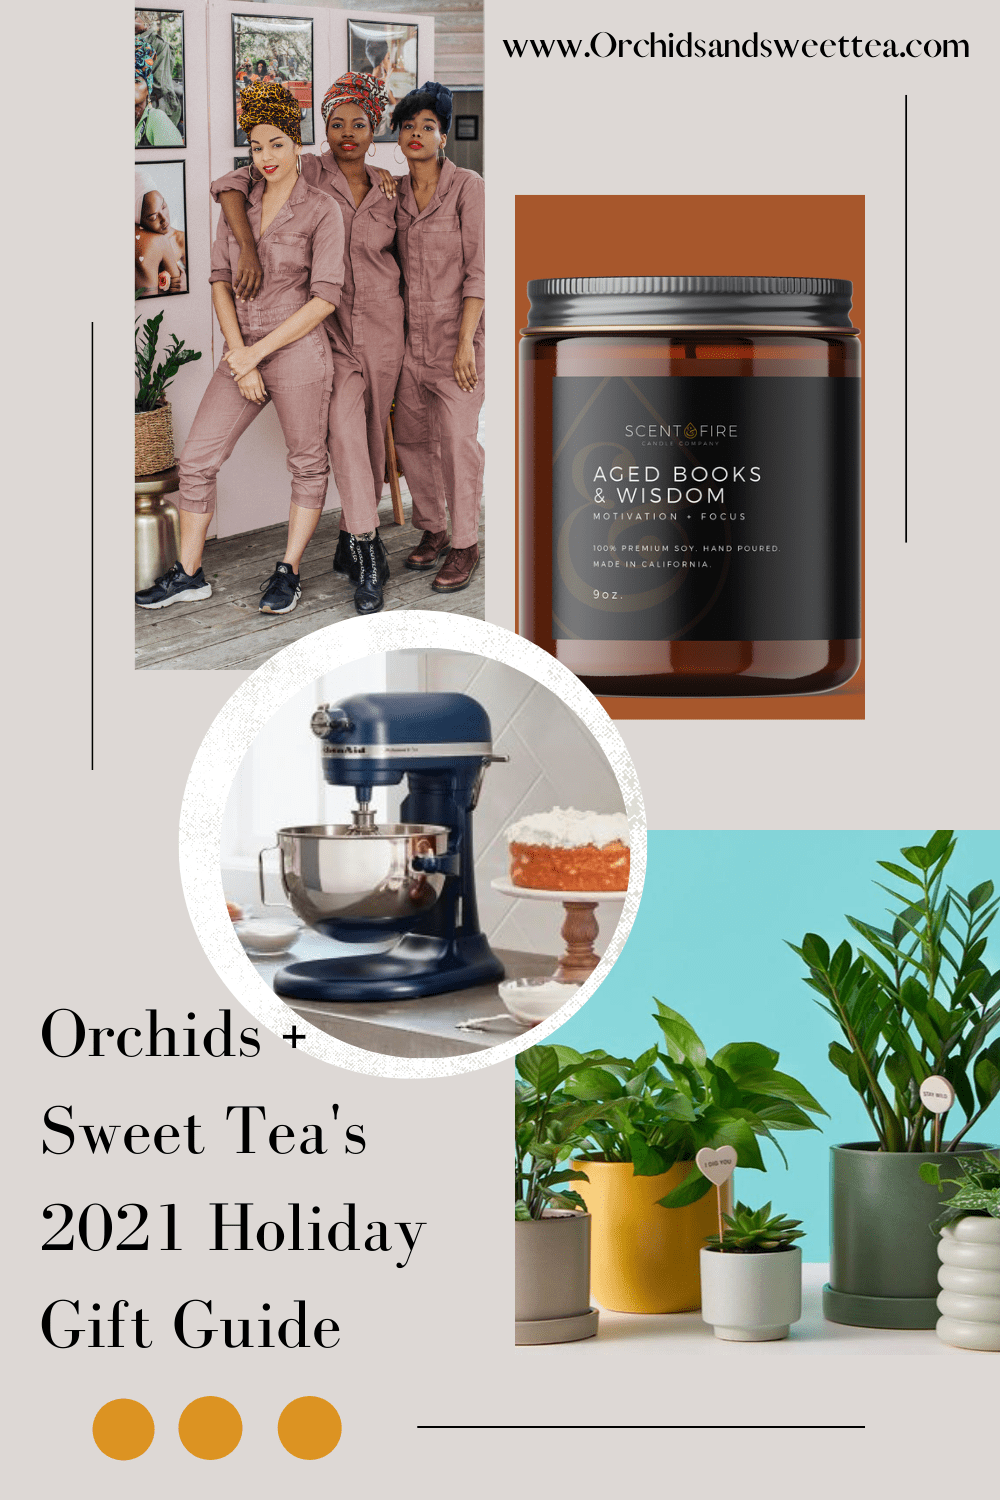 Orchids + Sweet Tea's 2021 Holiday Gift Guide